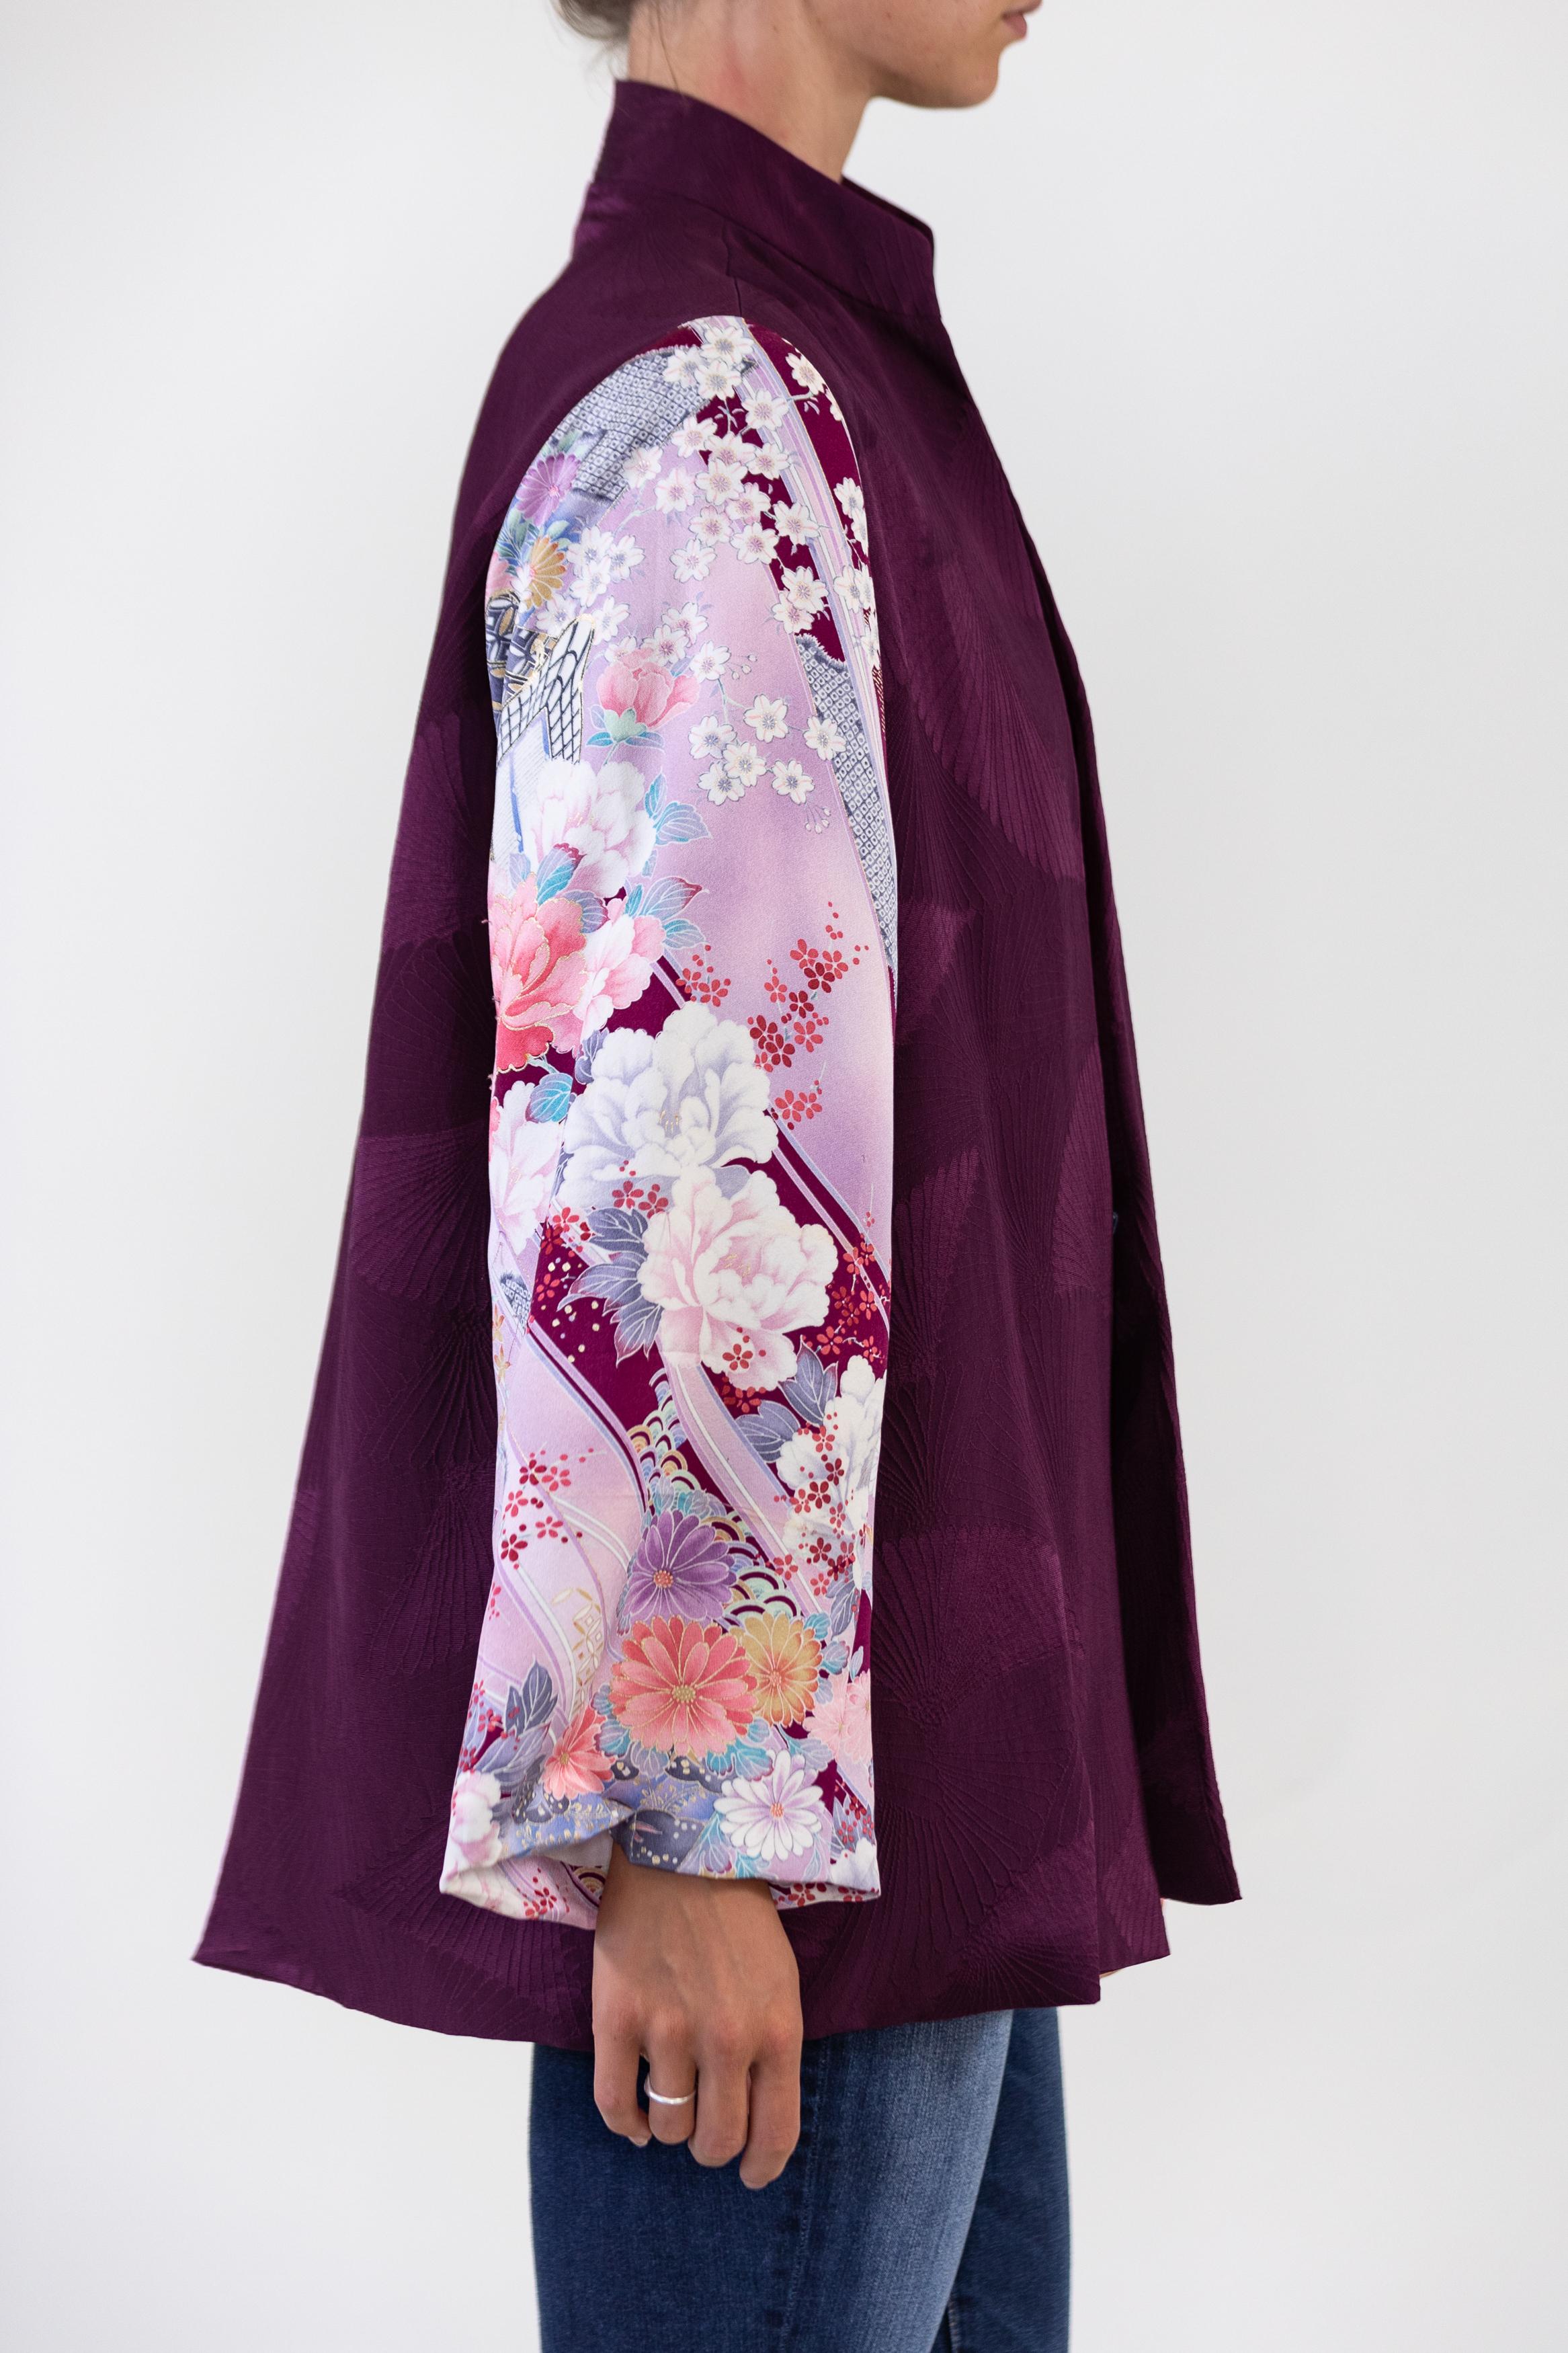 Morphew Collection Purple Floral Print Japanese Kimono Silk Jacket
MORPHEW COLLECTION is made entirely by hand in our NYC Ateliér of rare antique materials sourced from around the globe. Our sustainable vintage materials represent over a century of